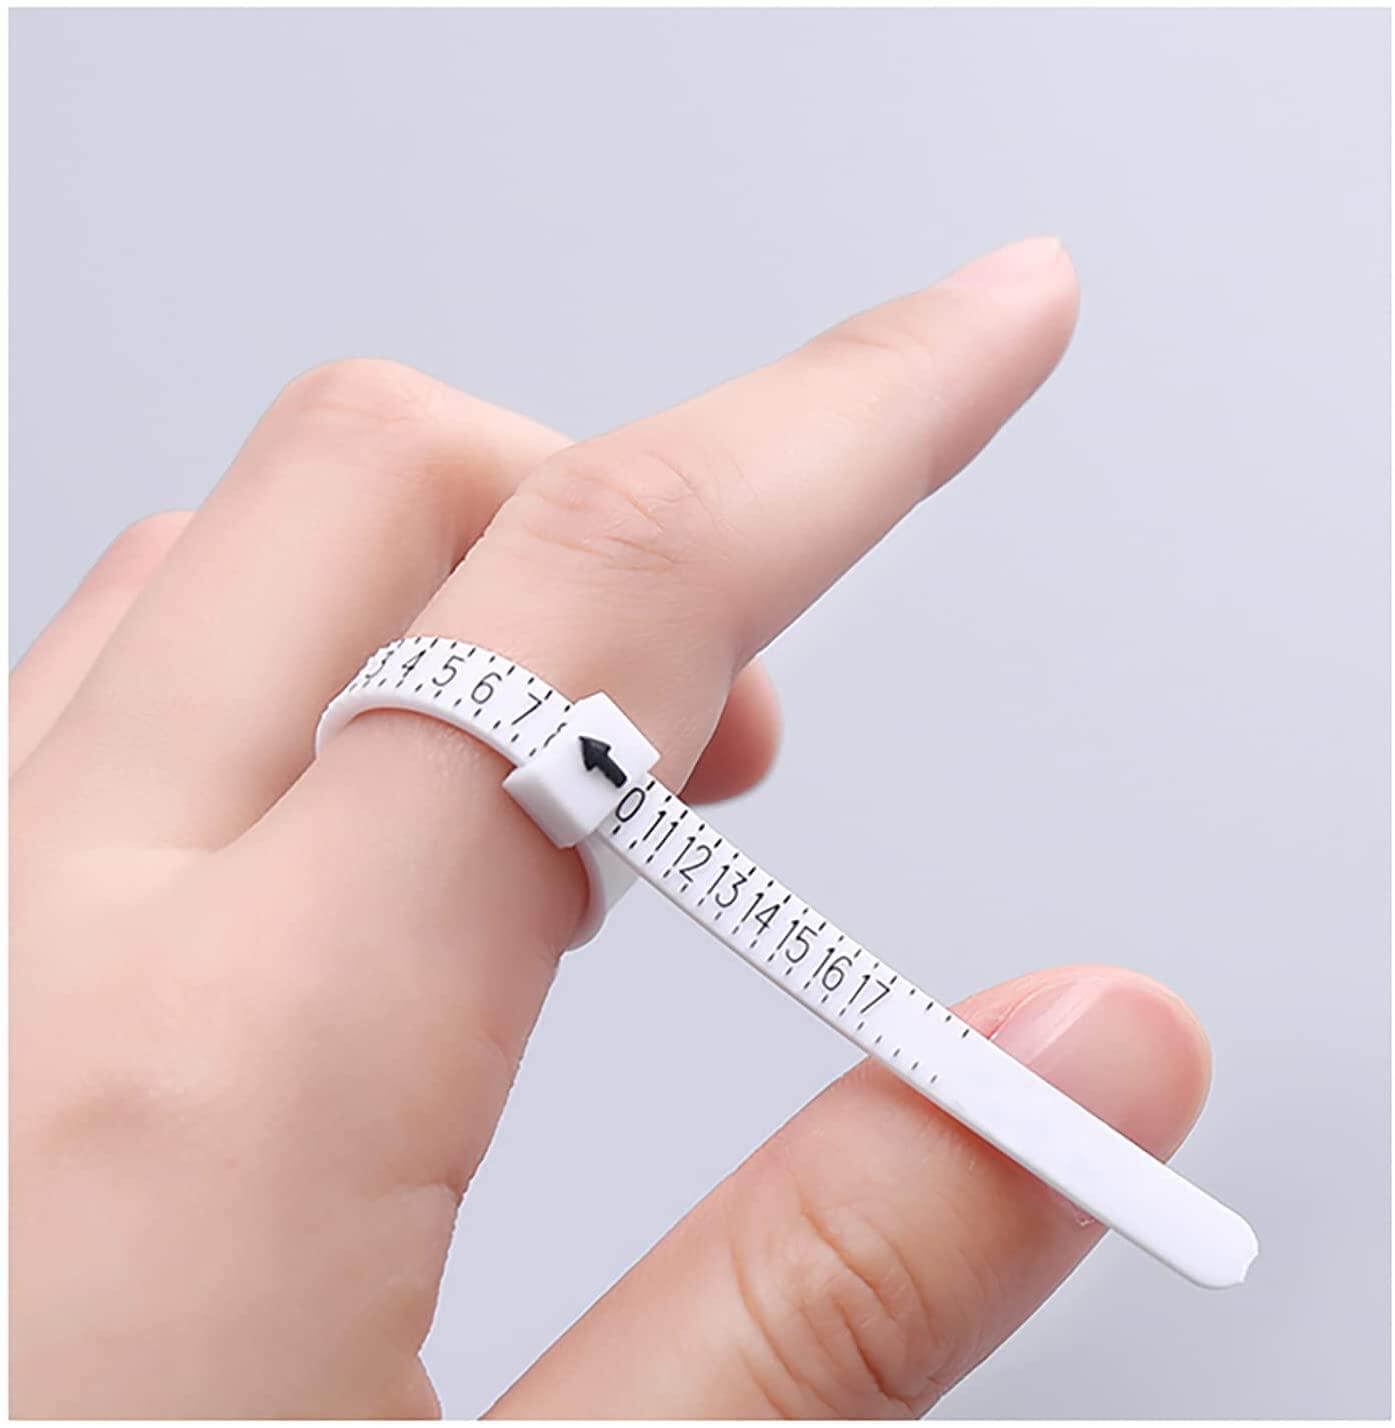 Ring Sizing Tool (free with purchase)